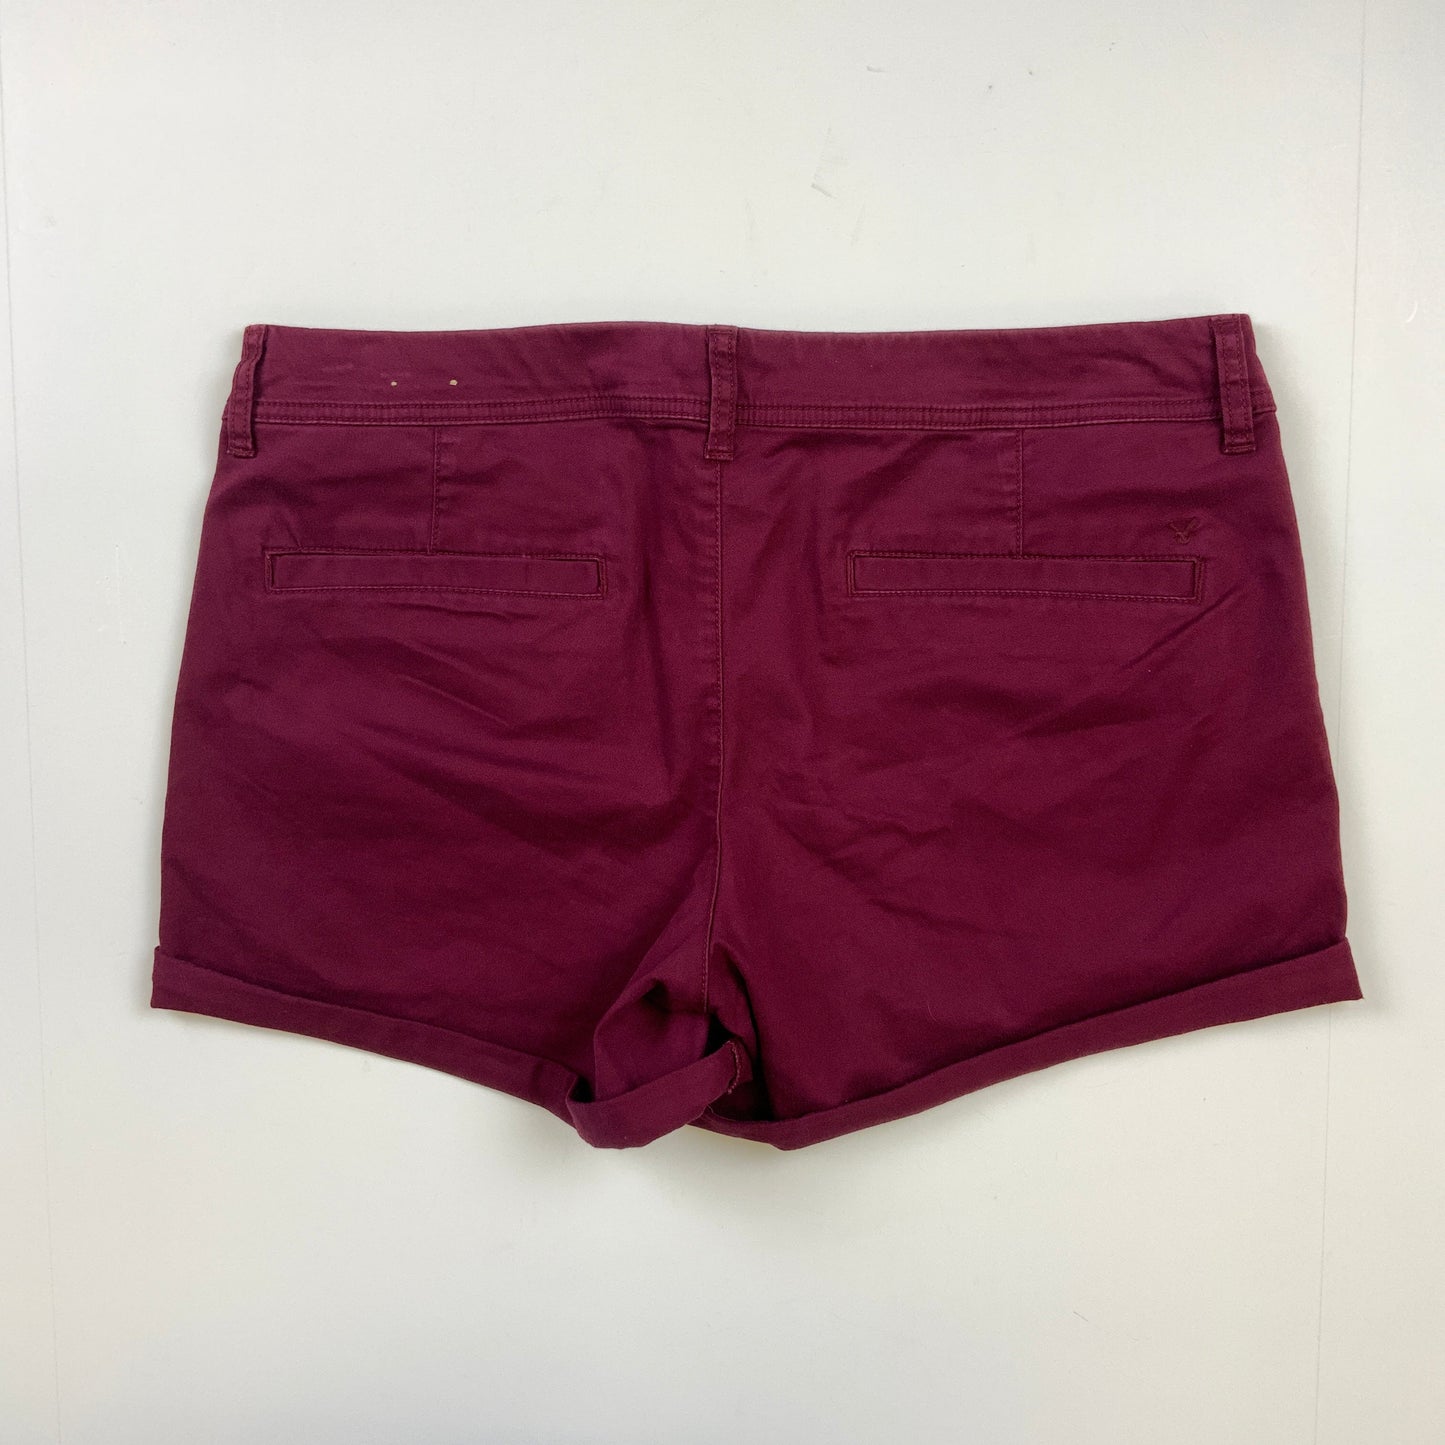 Red Shorts American Eagle, Size 14